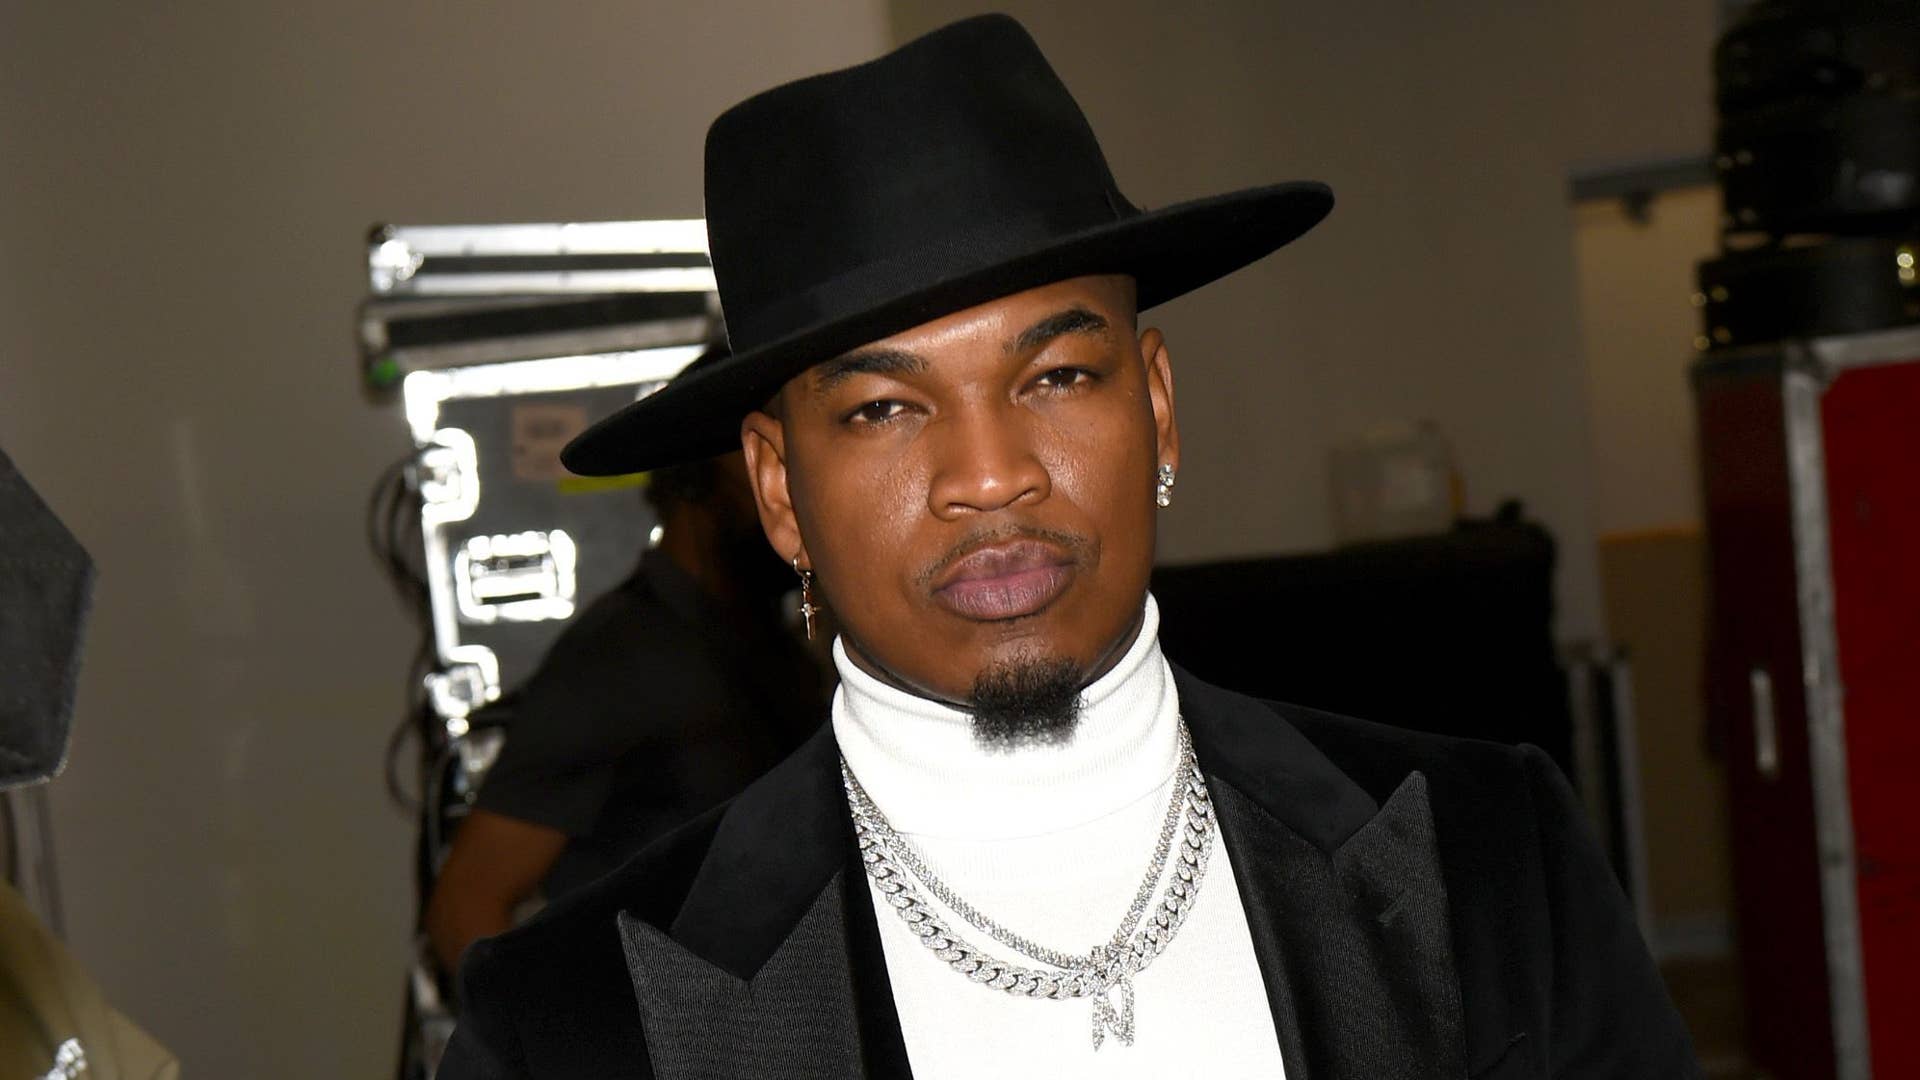 Ne-Yo is pictured staring at the camera